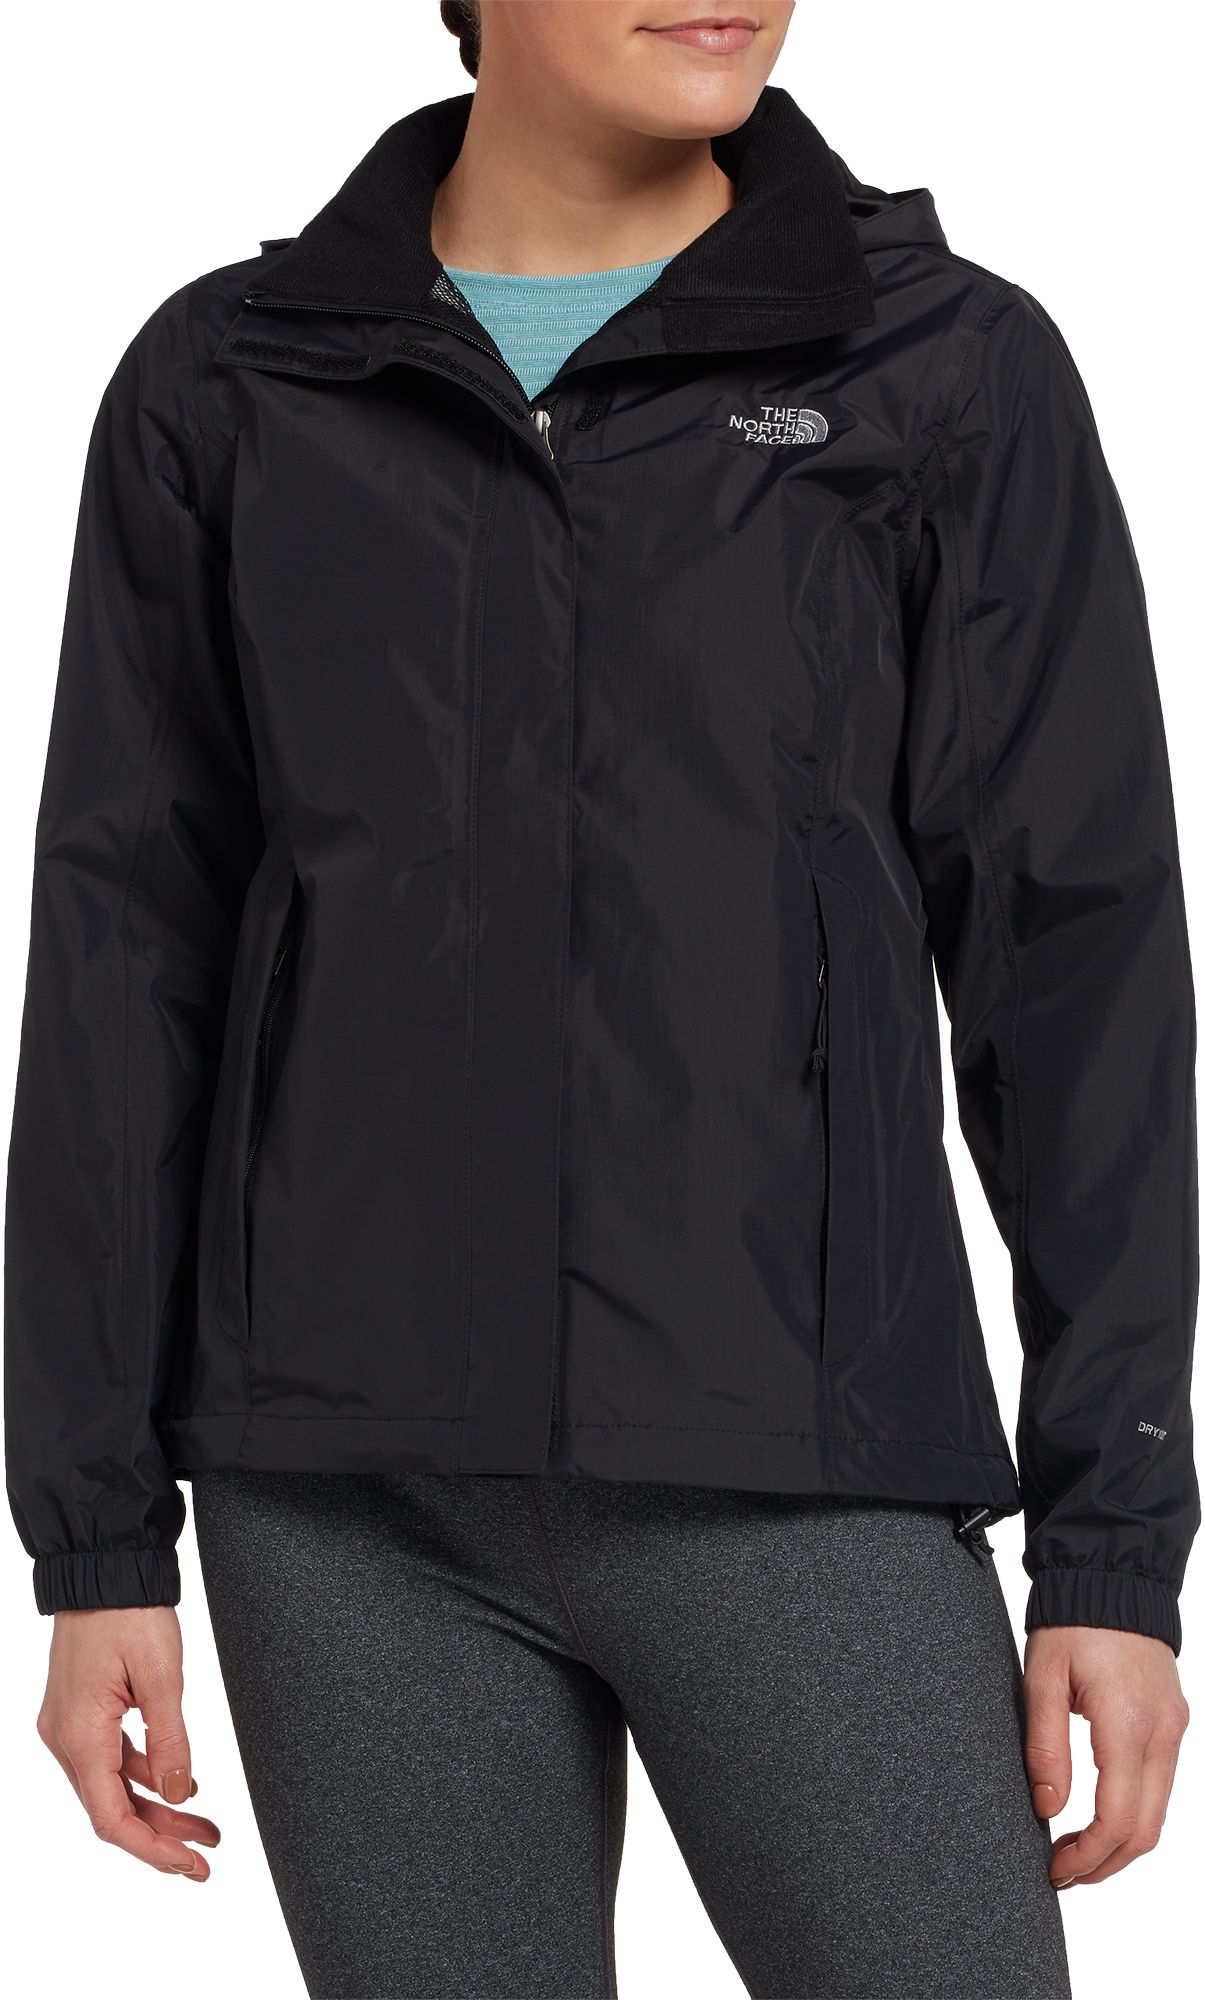 the north face resolve 2 women's jacket